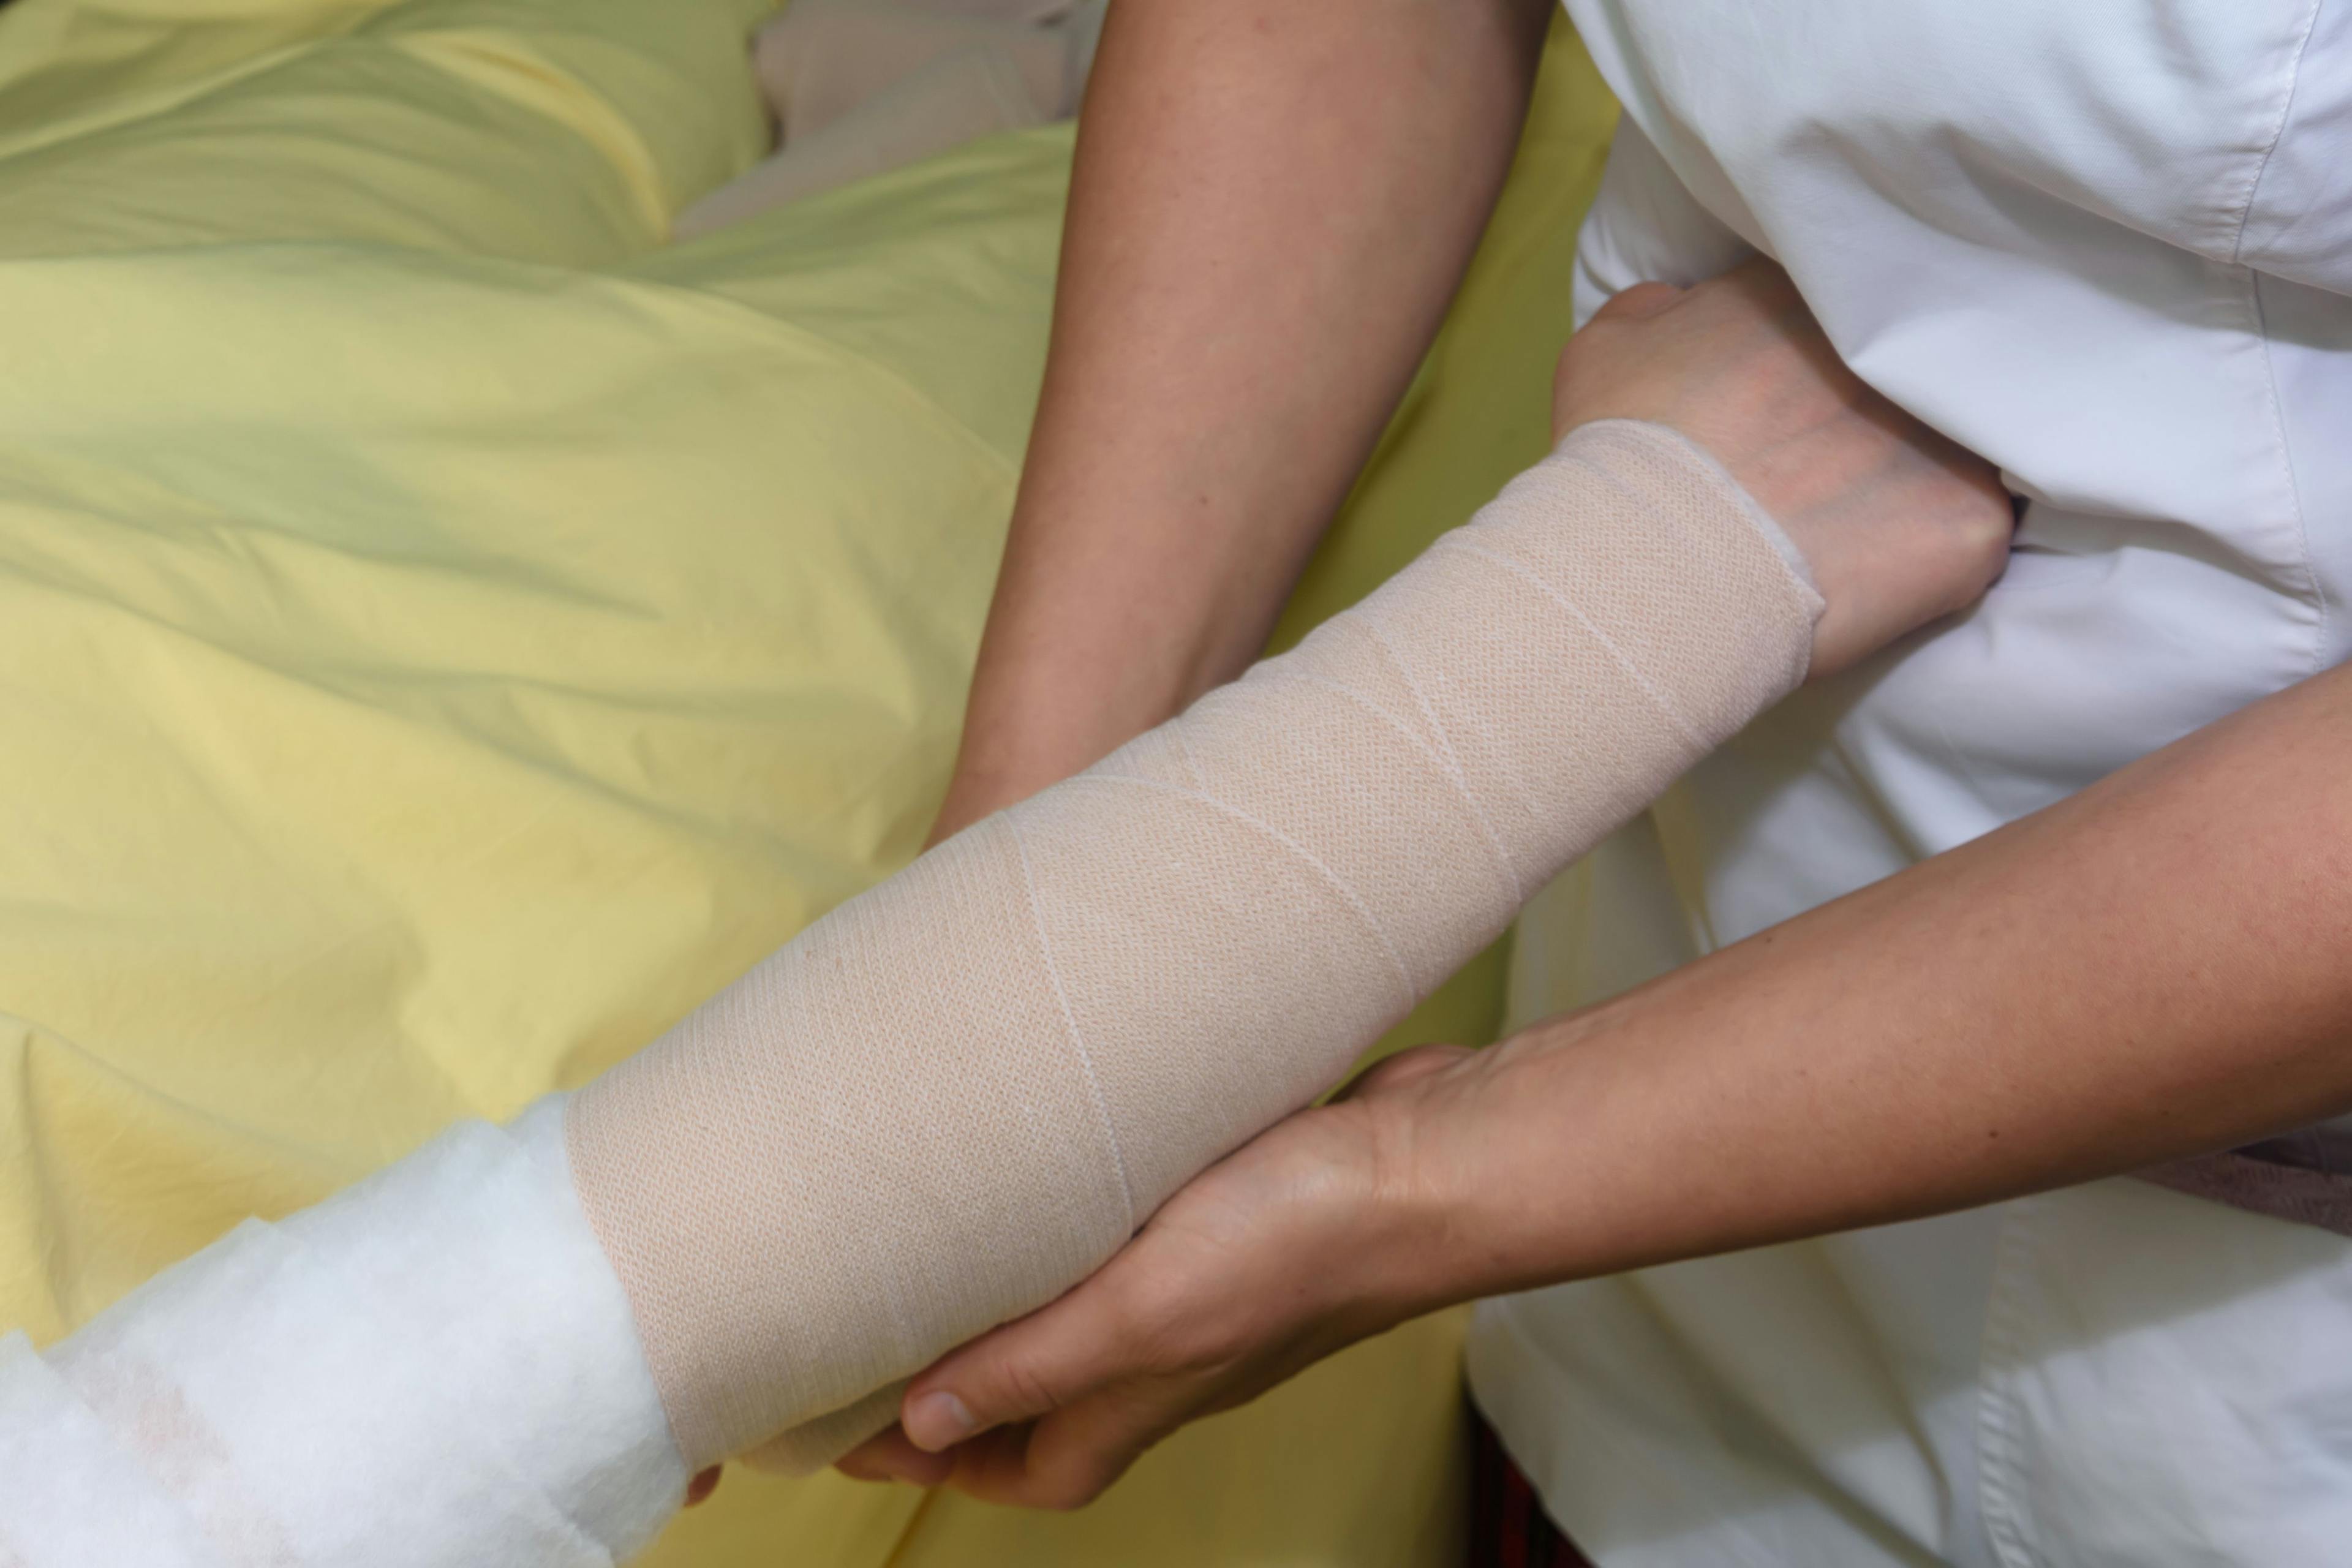 Lymphedema management: Wrapping Lymphedema Hand and Arm using multilayer bandages to control Lymphedema. Part of complete decongestive therapy (cdt) and manual lymphatic drainage (MLD)  | Image credit: © petiast - ©  stock.adobe.com